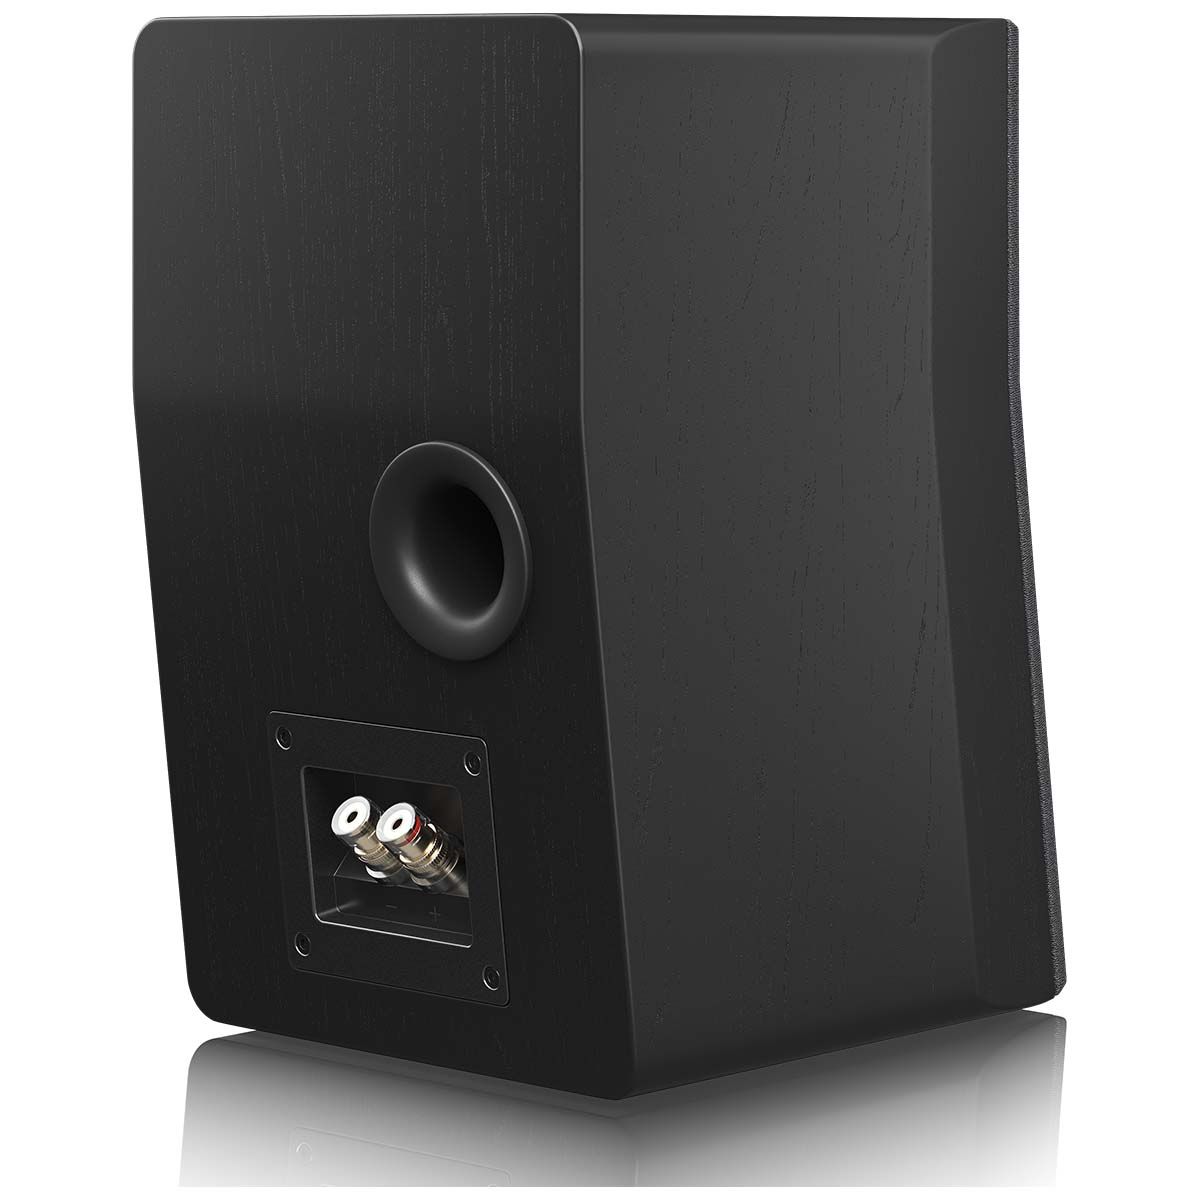 SVS Ultra Evolution Nano Bookshelf Speaker - single black oak with grille - angled rear view with components